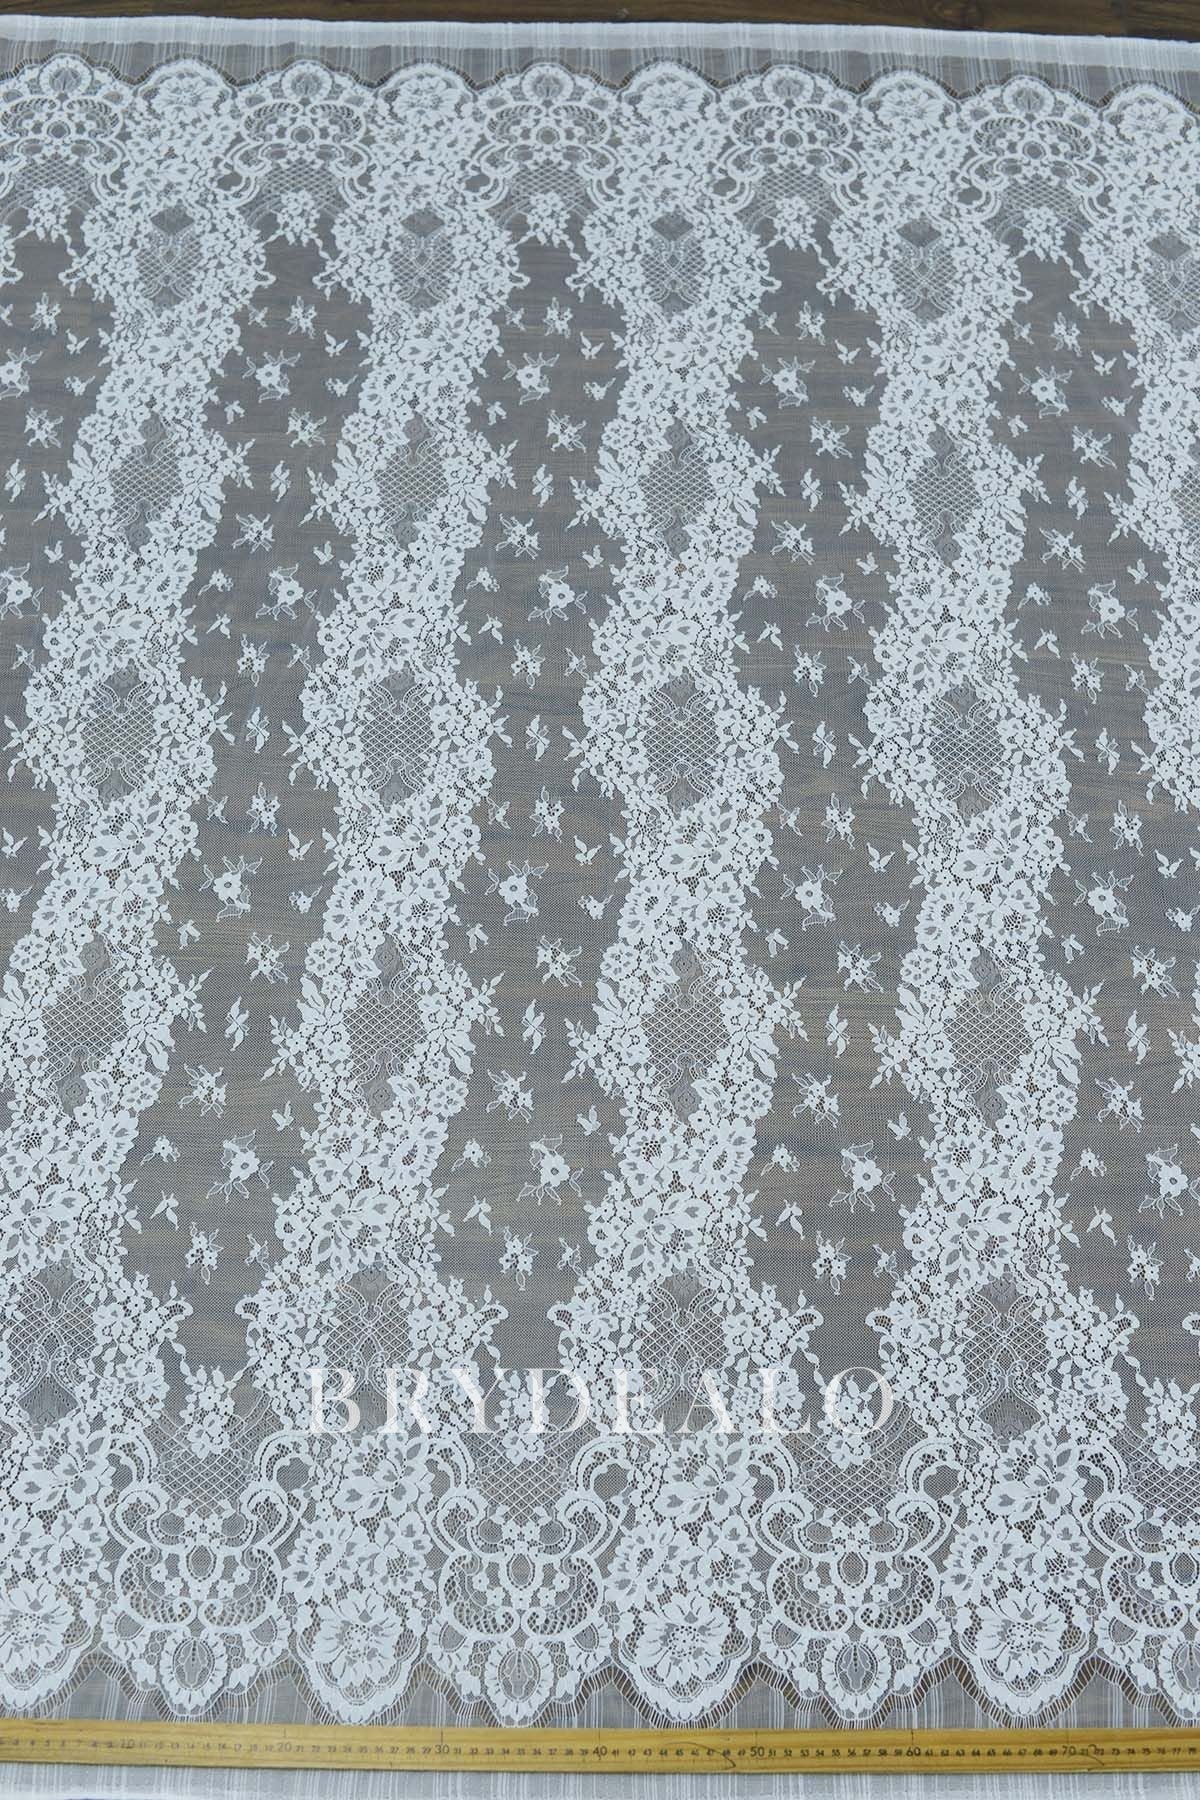  Motif Corded Scallop Lace Fabric